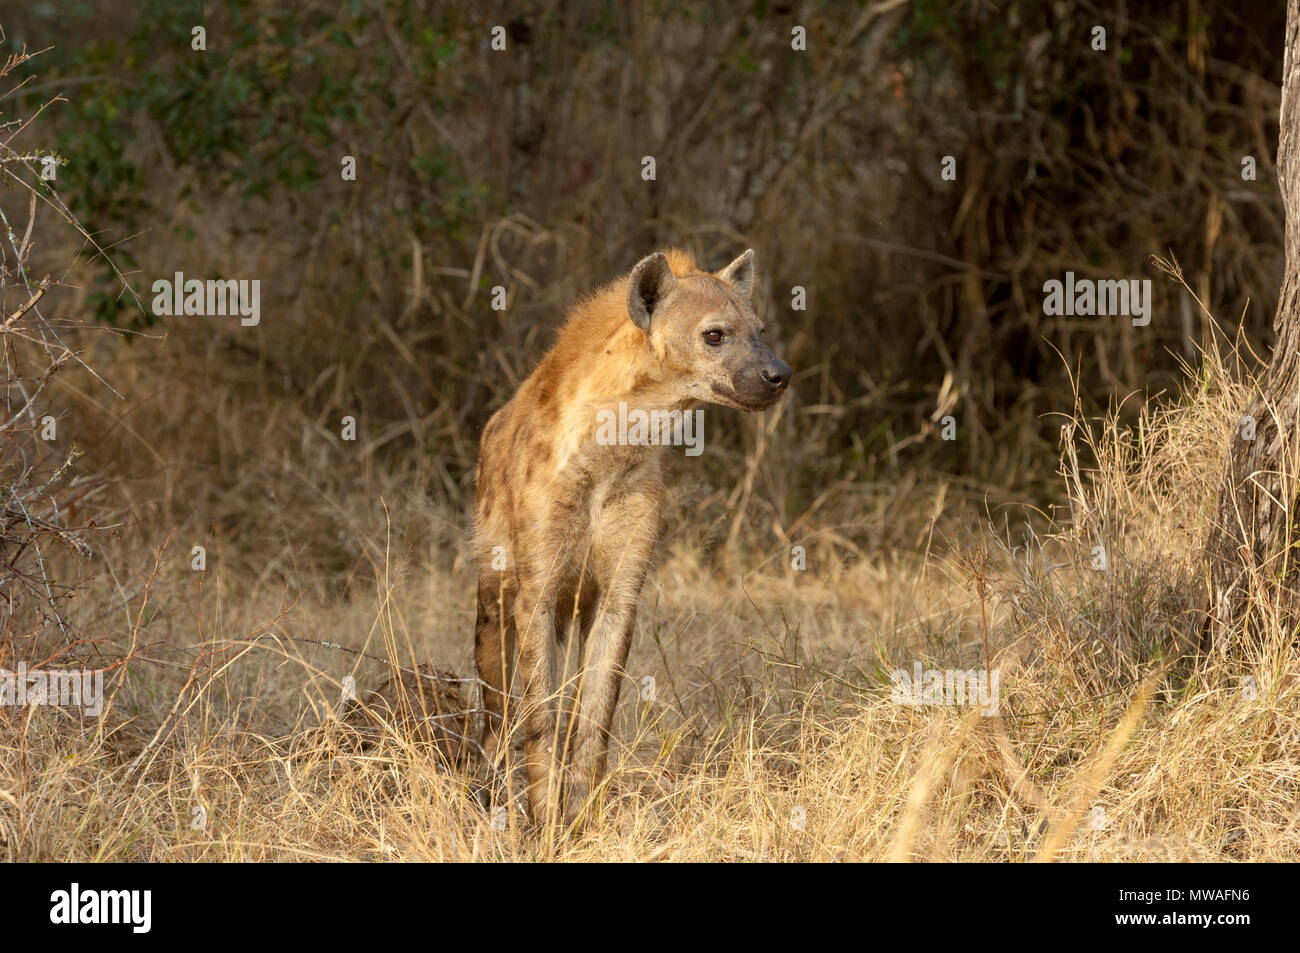 A Spotted Hyena (Crocuta crocuta) in a clearing in tall grass in Sabi Sand game reserve in South Africa Stock Photo